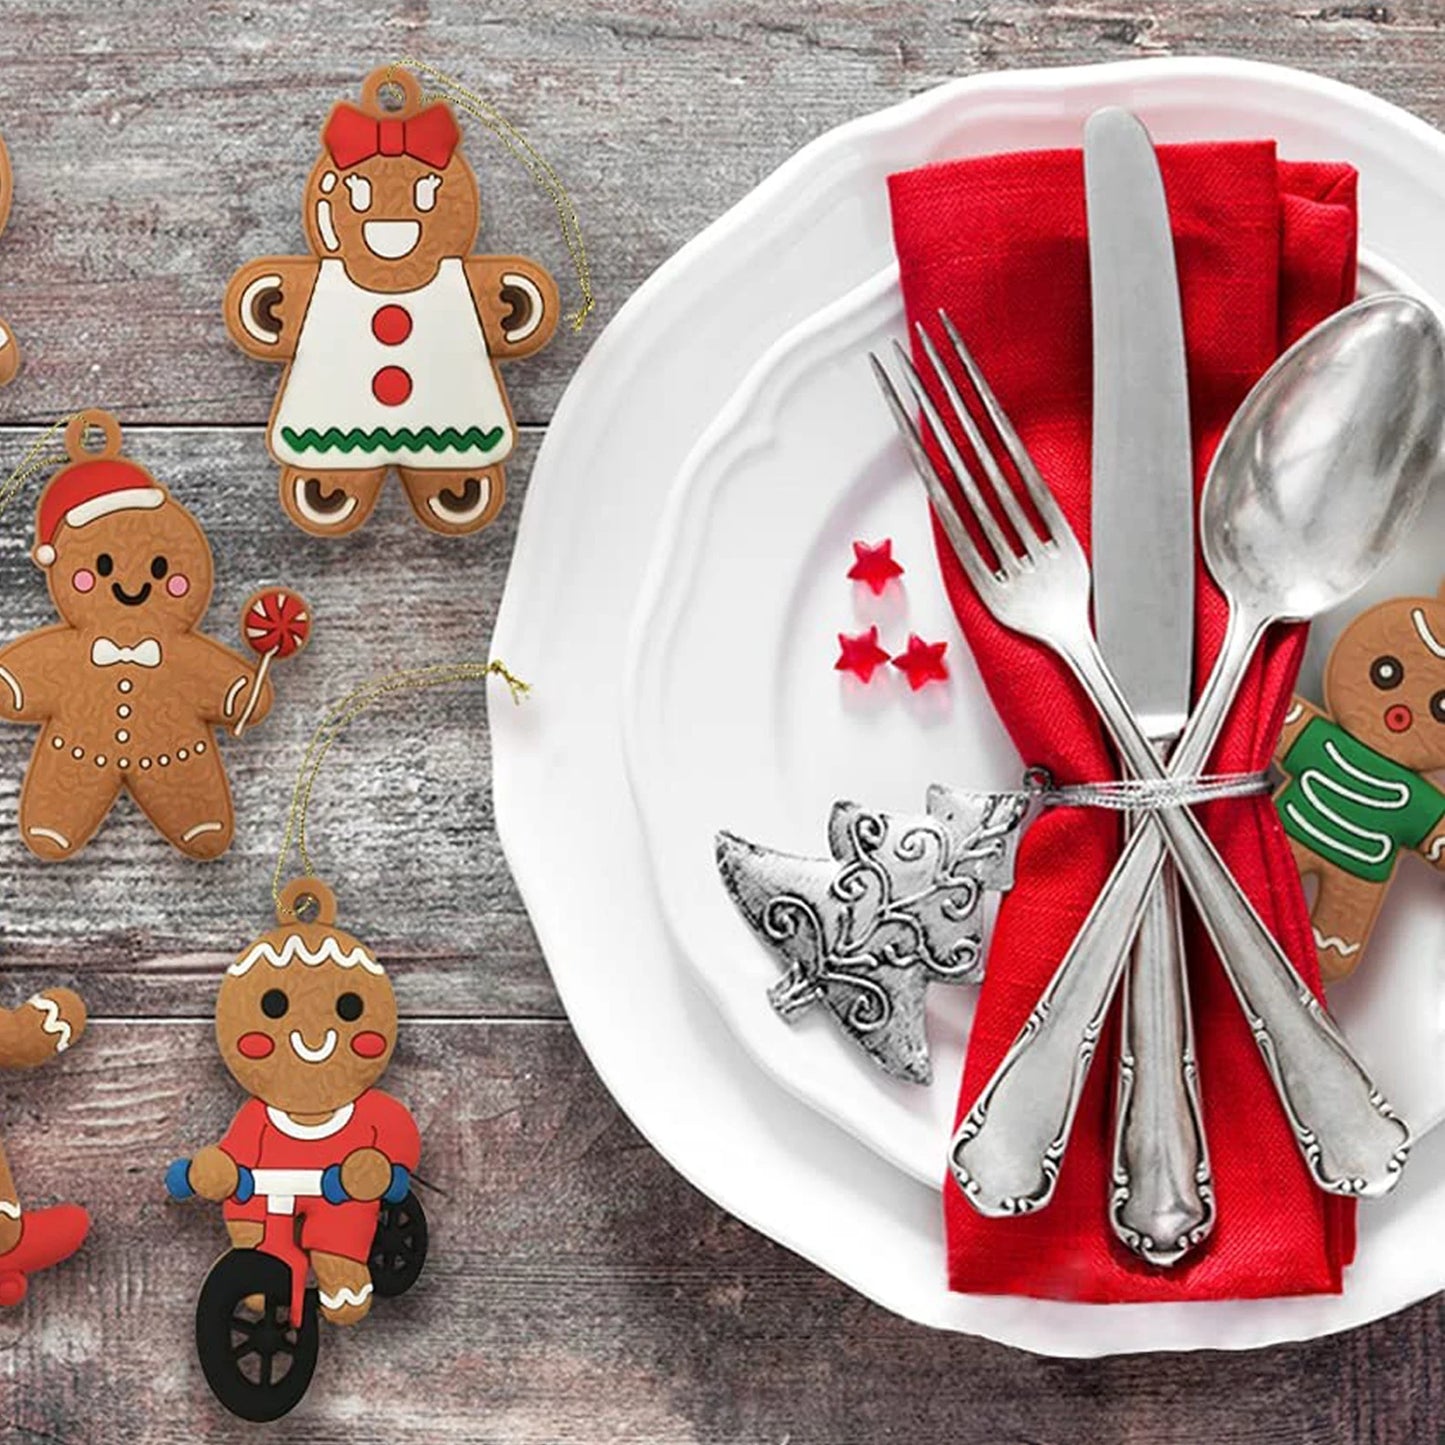 12pcs Christmas Gingerbread Man Ornaments for Christmas Tree Decorations 3 Inch Tall - Bee's to Find